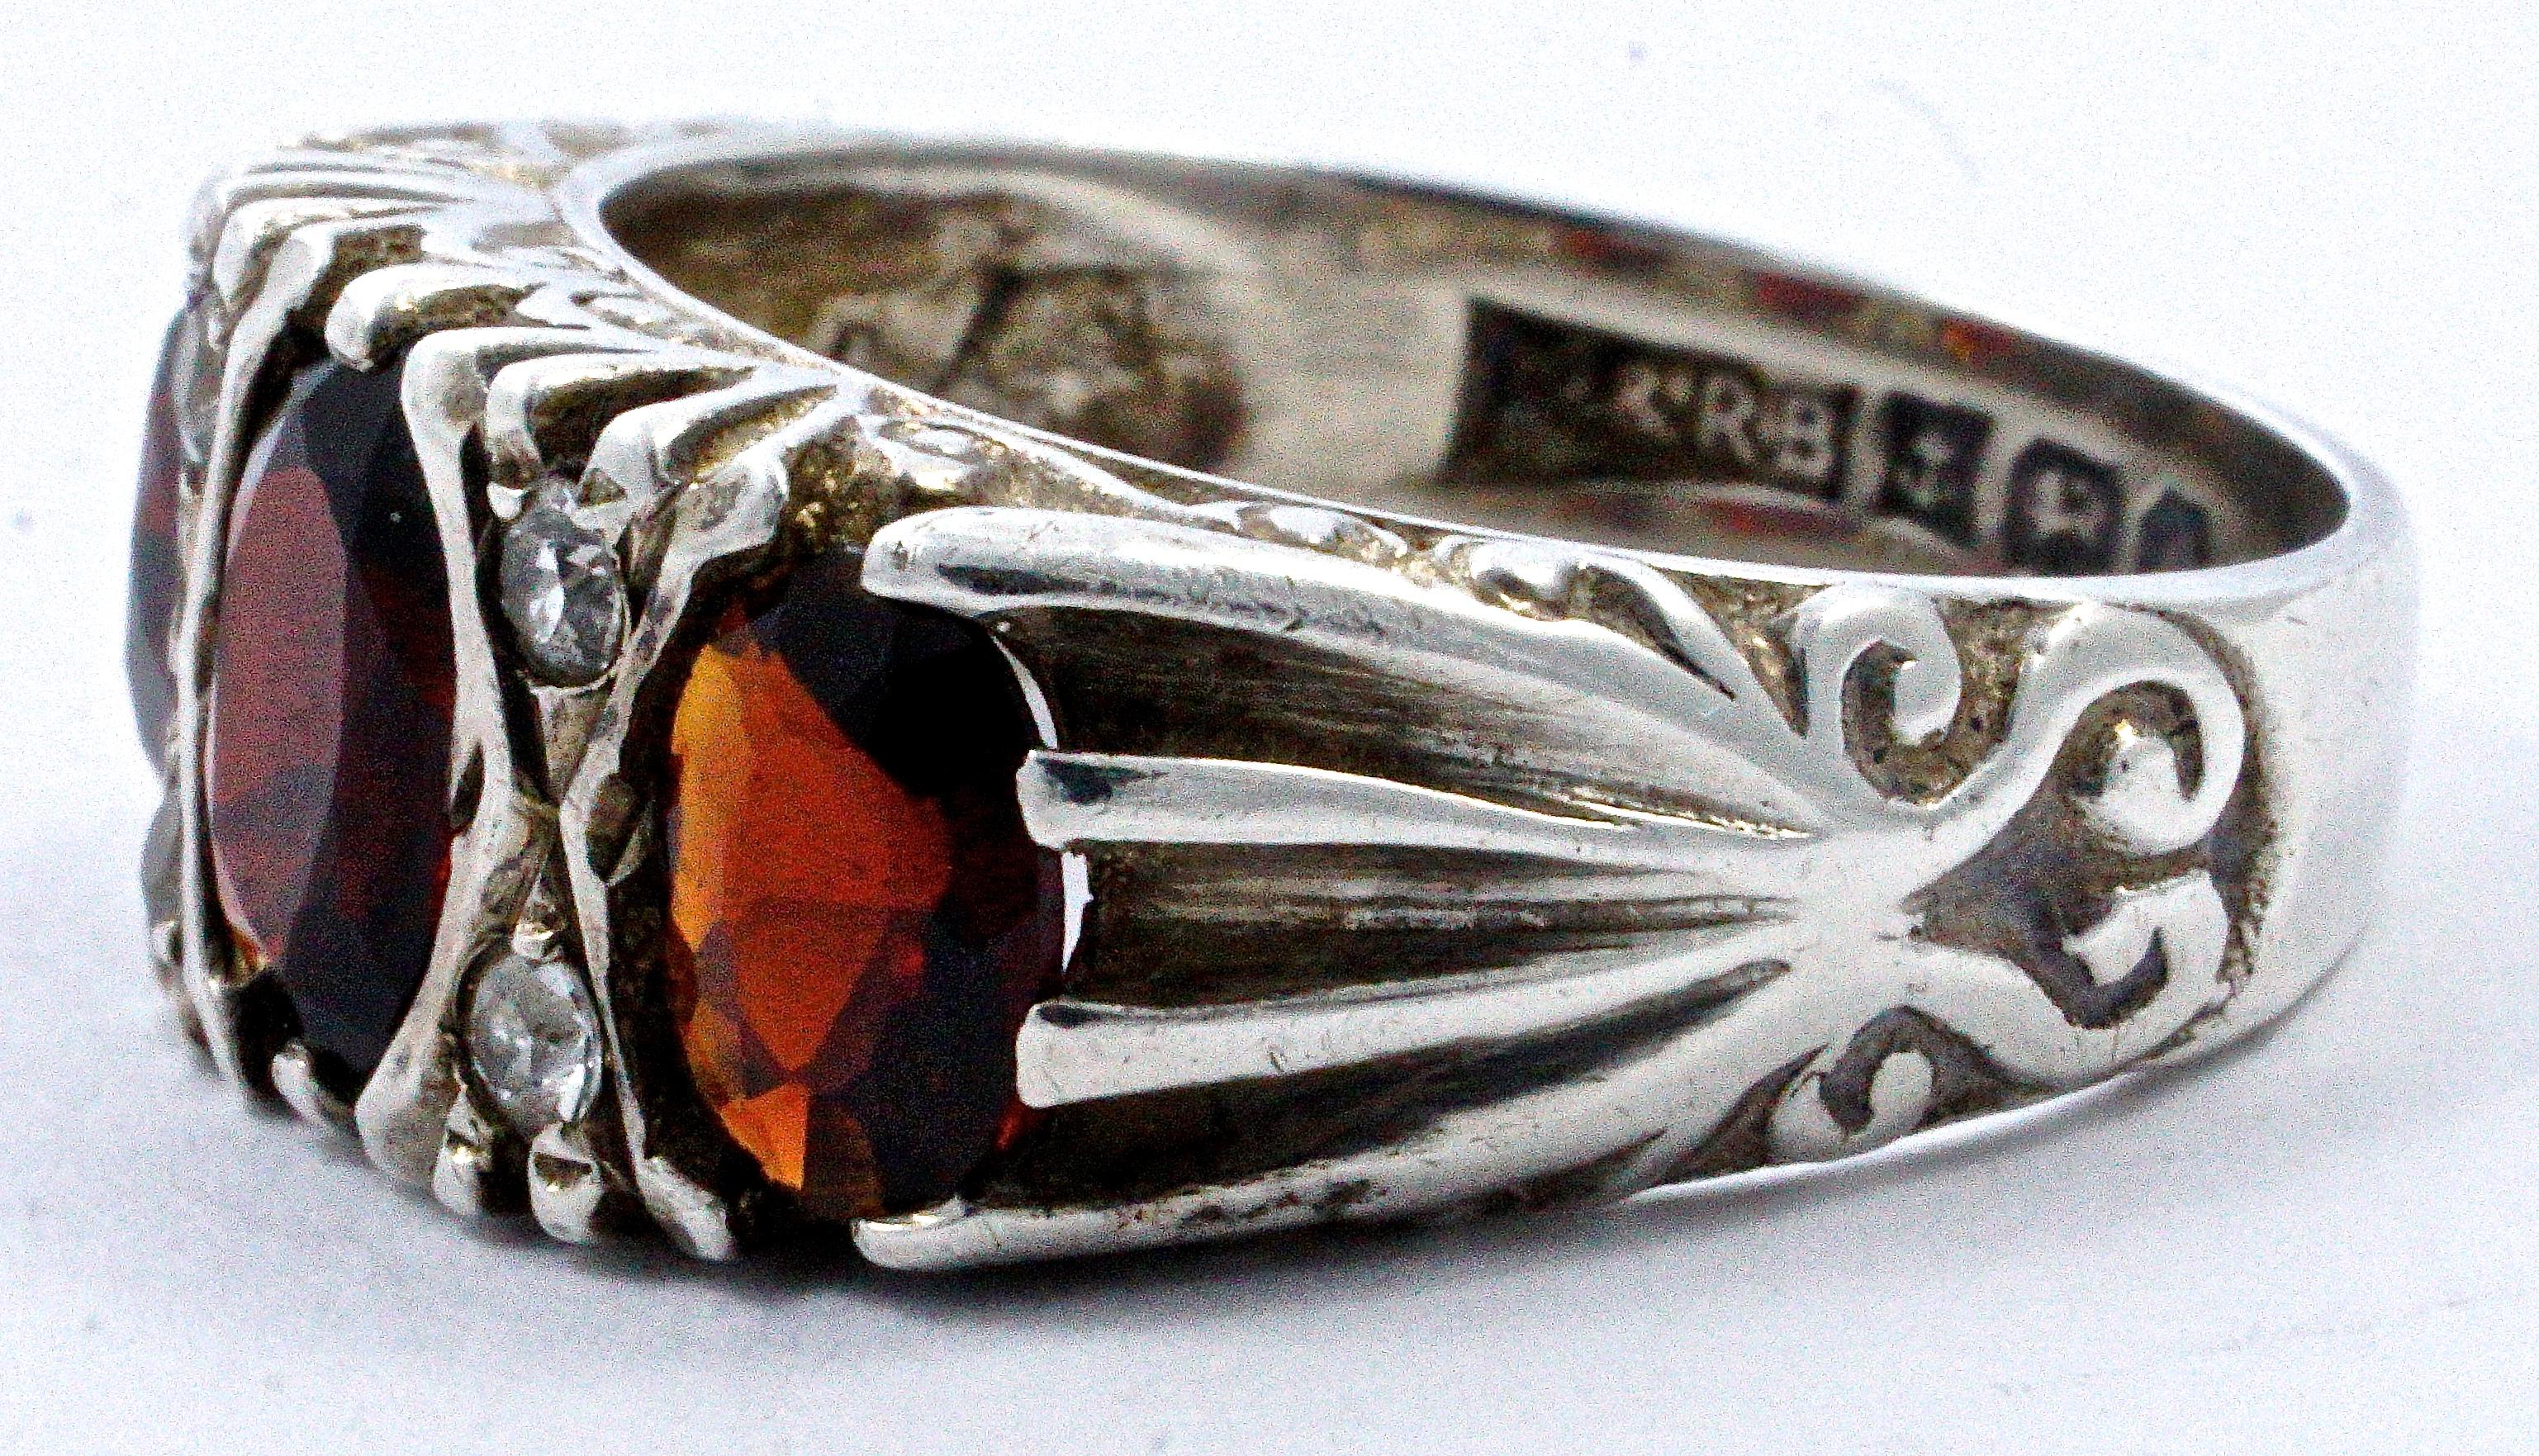 Vintage sterling silver ring featuring three beautiful faceted dark red garnets and four clear rhinestones. A lovely fancy swirl design decorates the setting and shoulders. Ring size UK K / US 5 1/8, and the front measures 1.6cm / .63 inch by